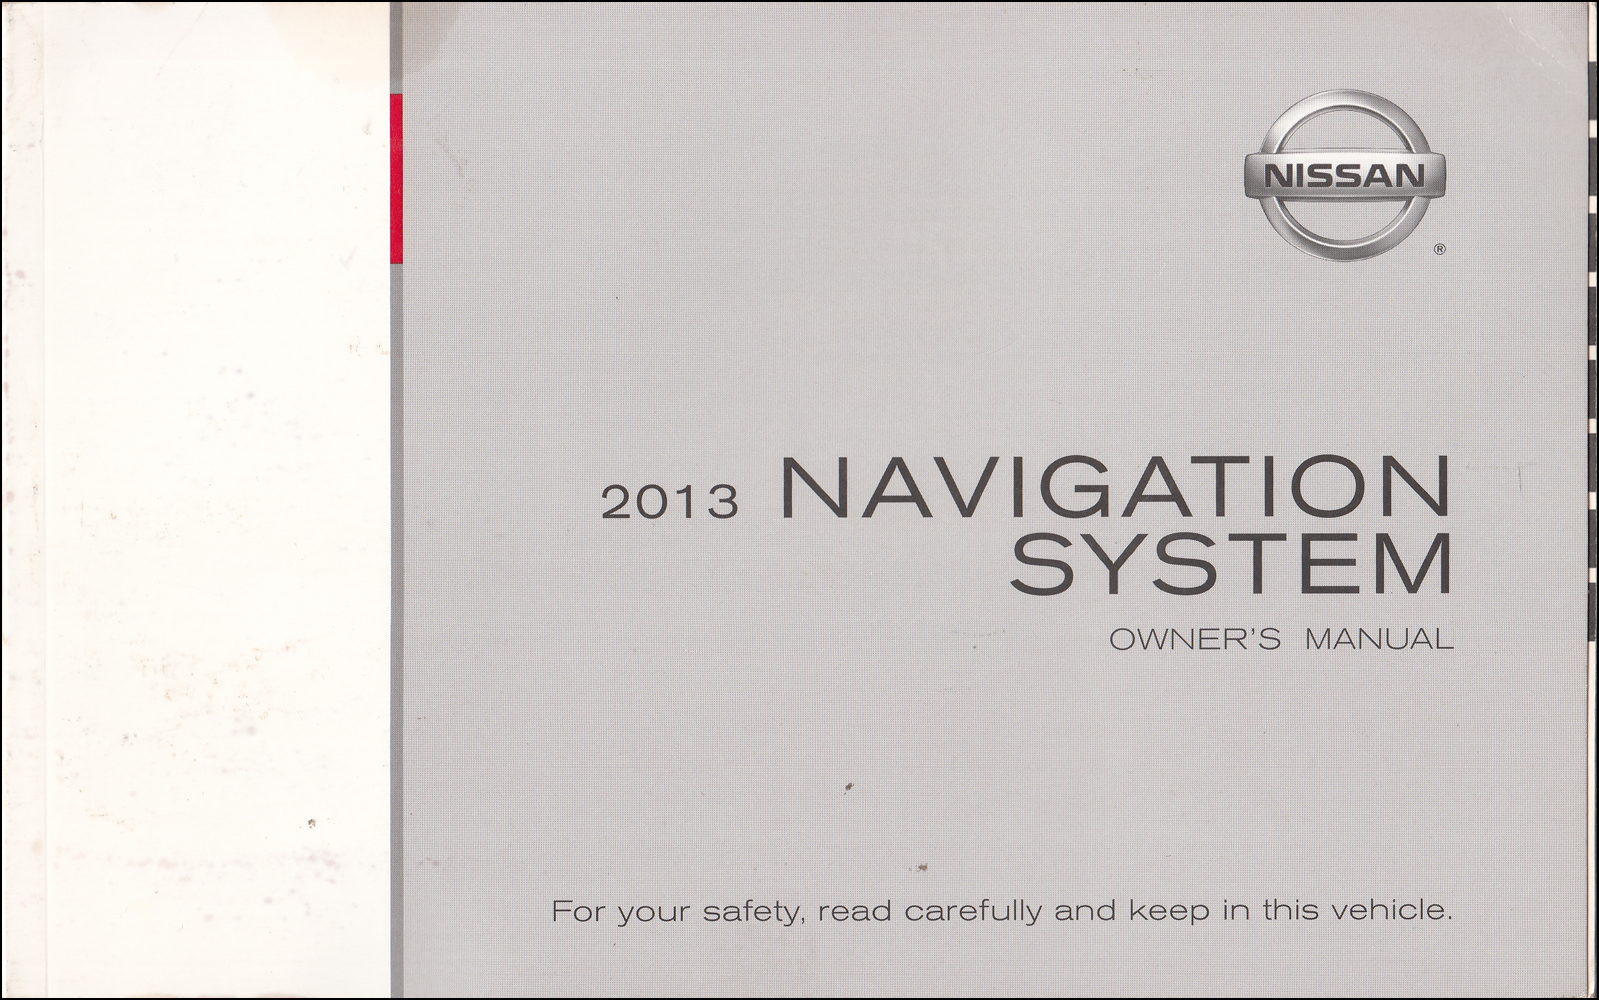 2013 Nissan Luxury Navigation System Owners Manual Original Pathfinder, Murano, Armada, Maxima, 370Z and Quest